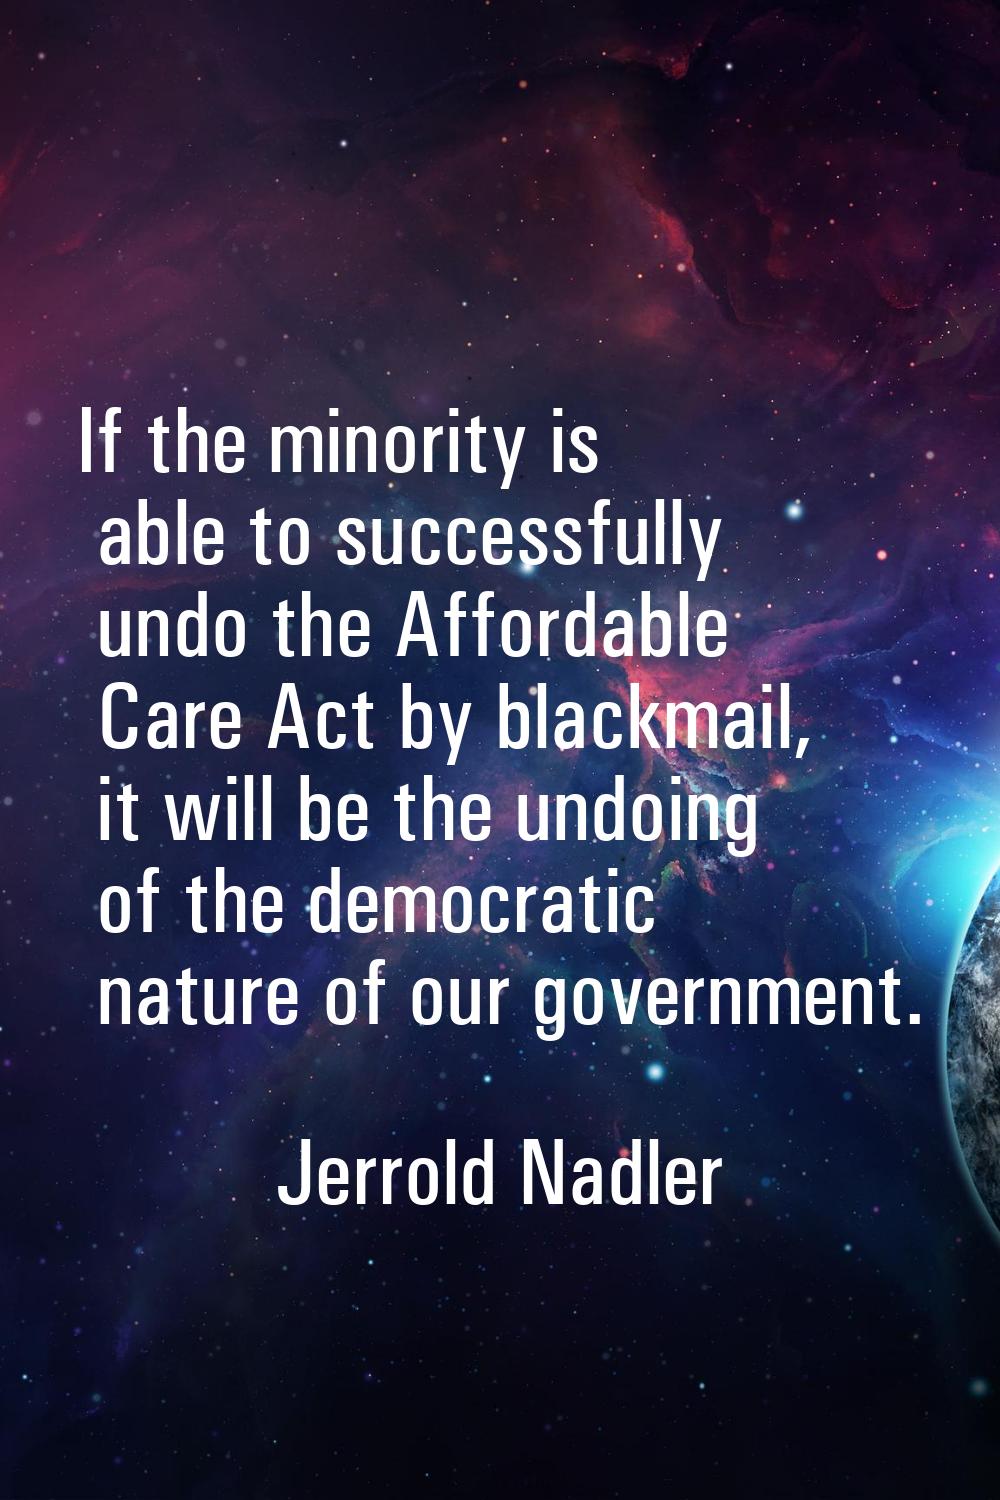 If the minority is able to successfully undo the Affordable Care Act by blackmail, it will be the u